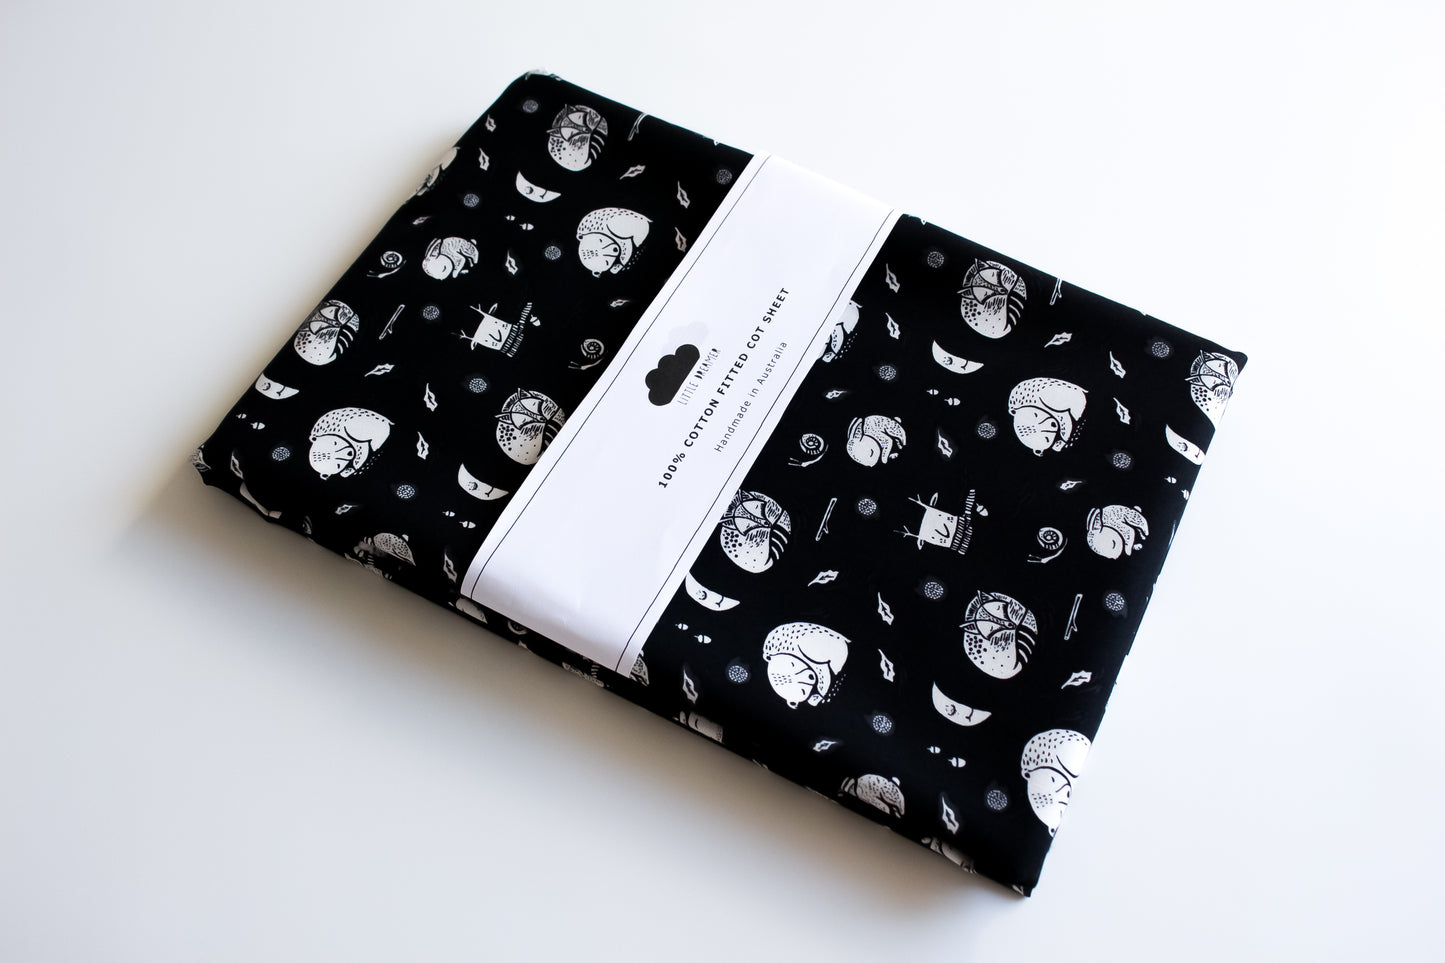 Fitted Cot Sheet - Monochrome Slumber